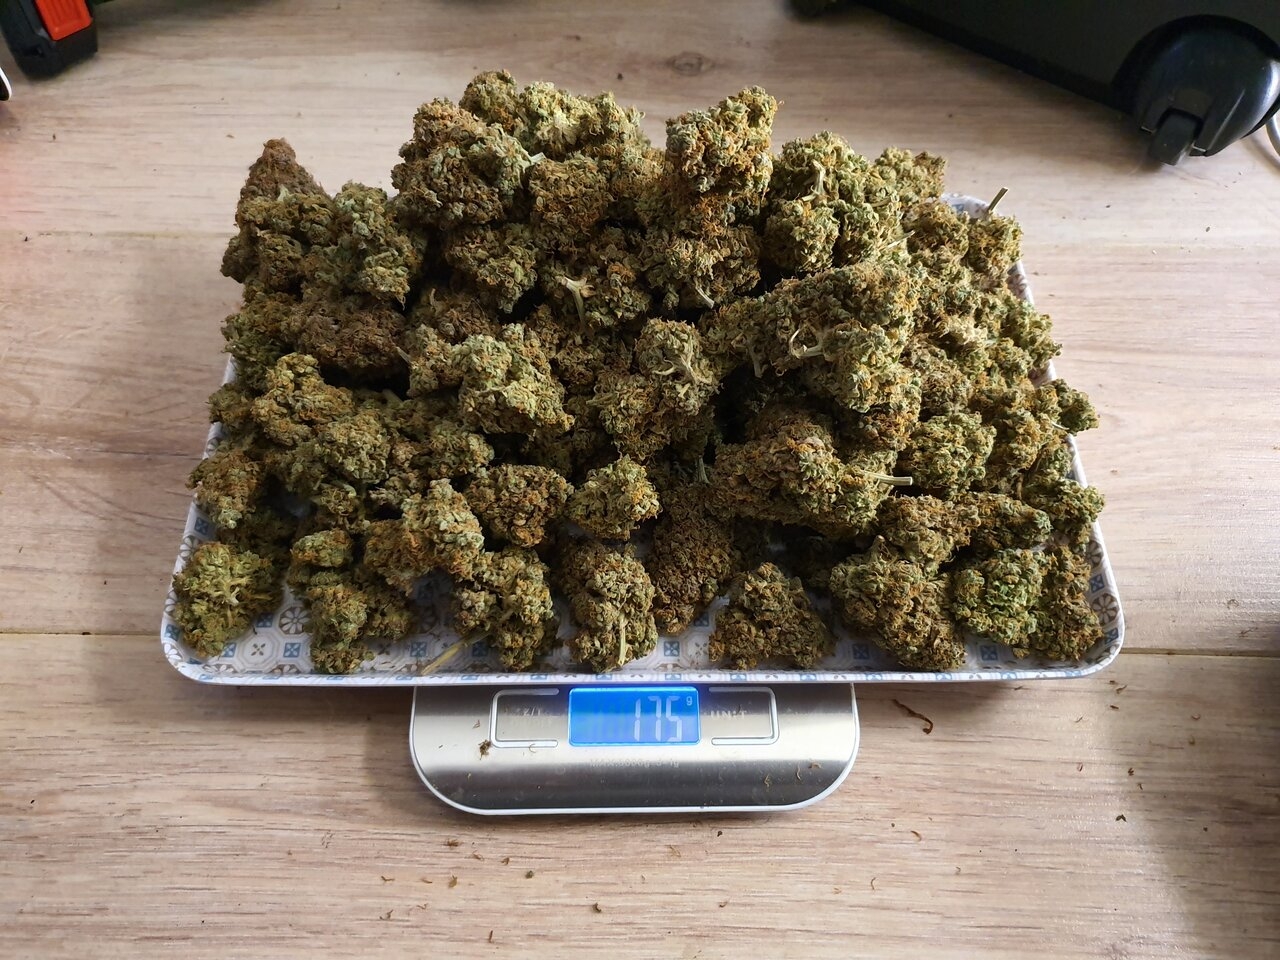 The rest of the other green crack